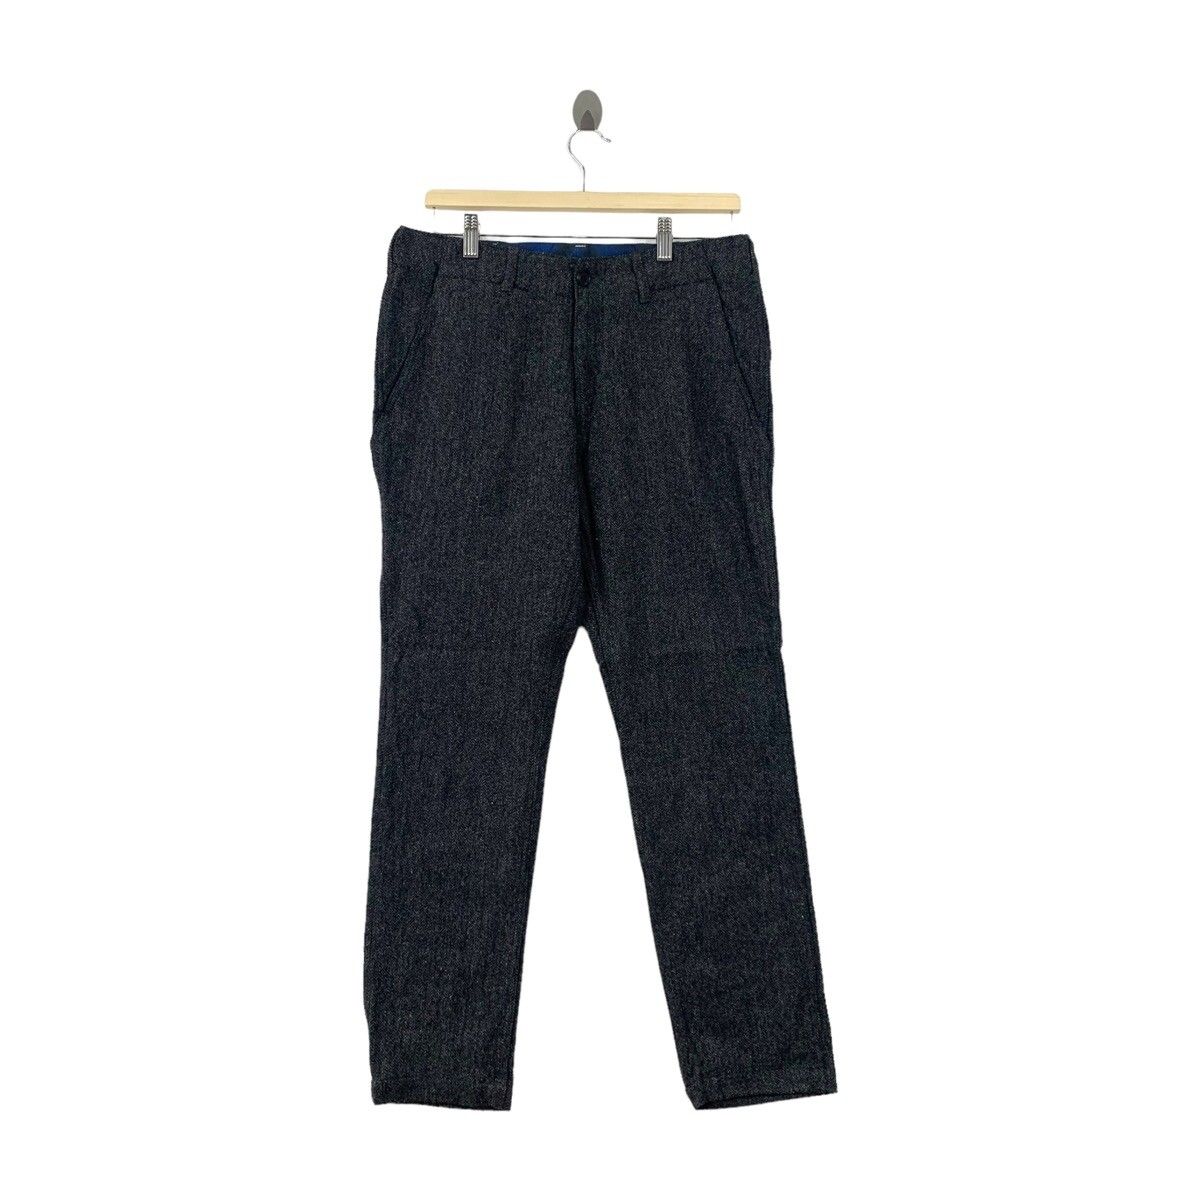 Beauty & Youth BEAUTY & YOUTH United Arrows Japanese Brand Wool Trouser Size US 32 / EU 48 - 1 Preview